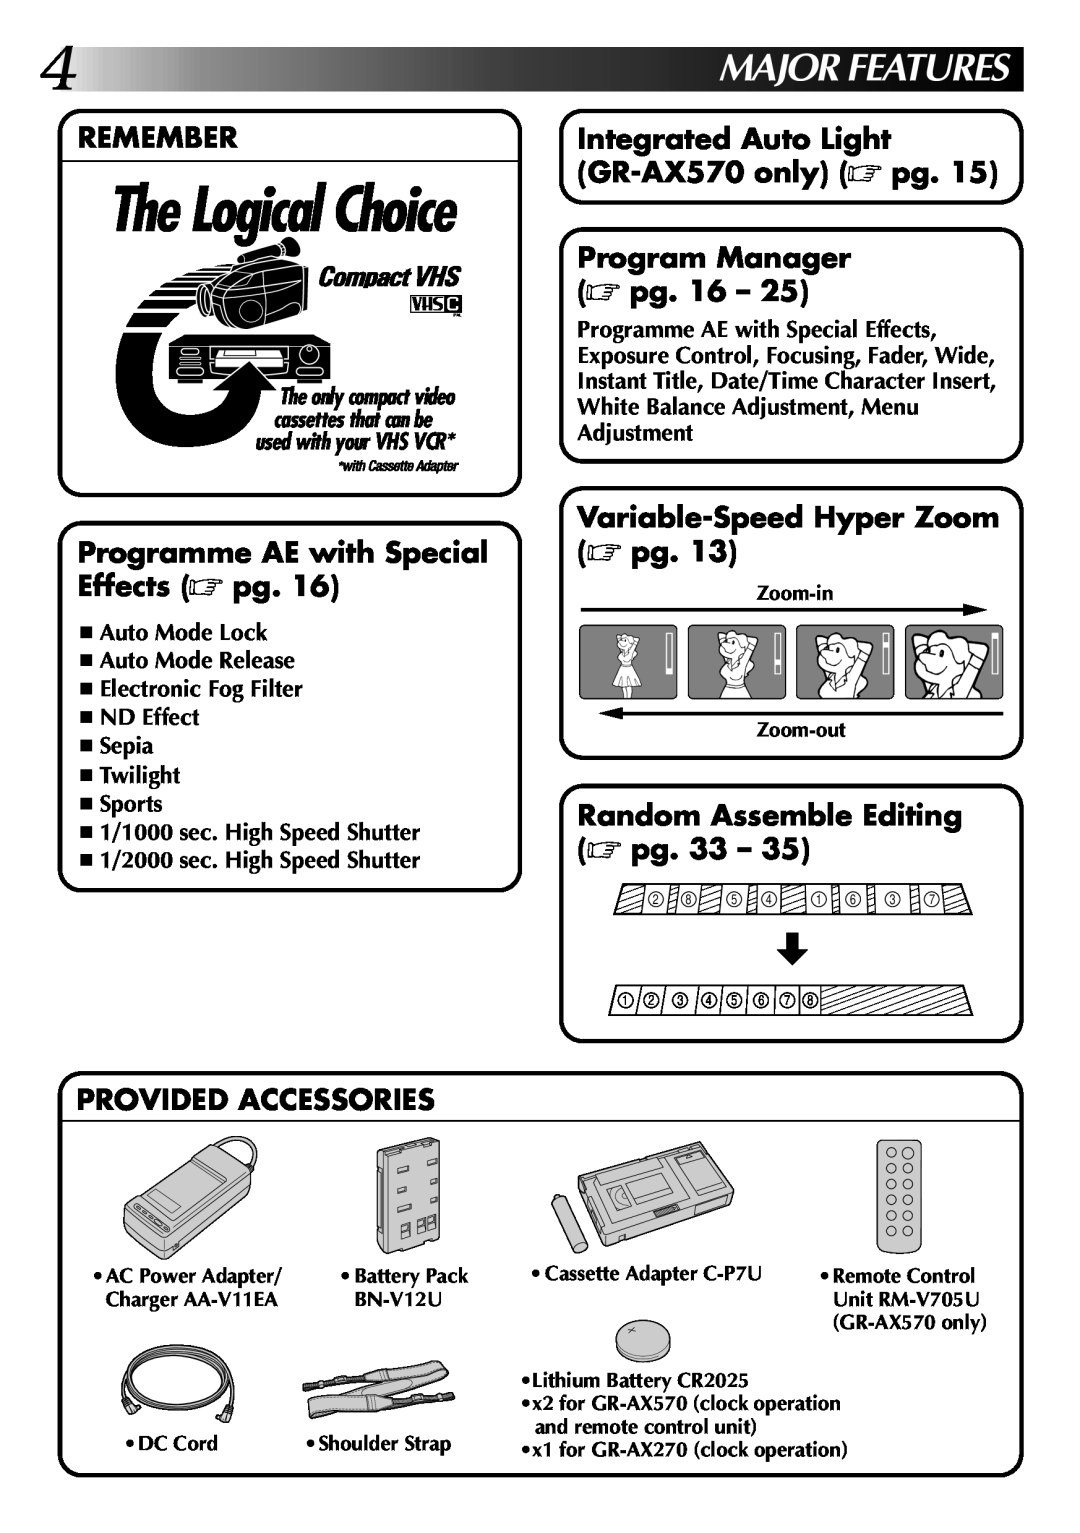 JVC Majorfeatures, Remember, Integrated Auto Light, GR-AX570 only pg, Program Manager pg. 16, Provided Accessories 